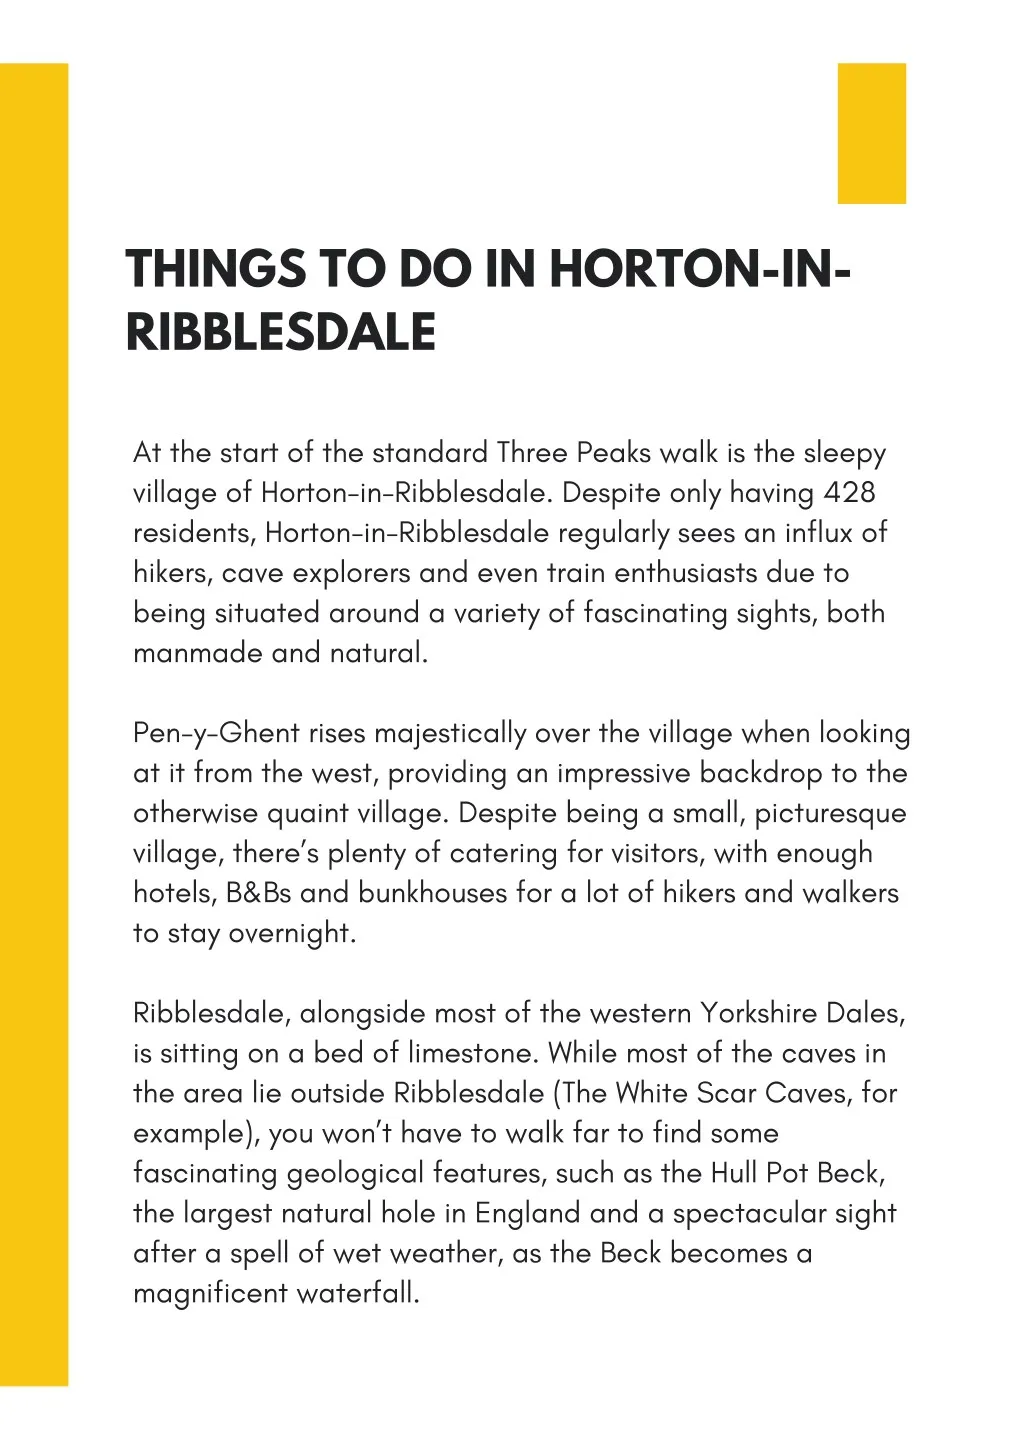 things to do in horton in ribblesdale